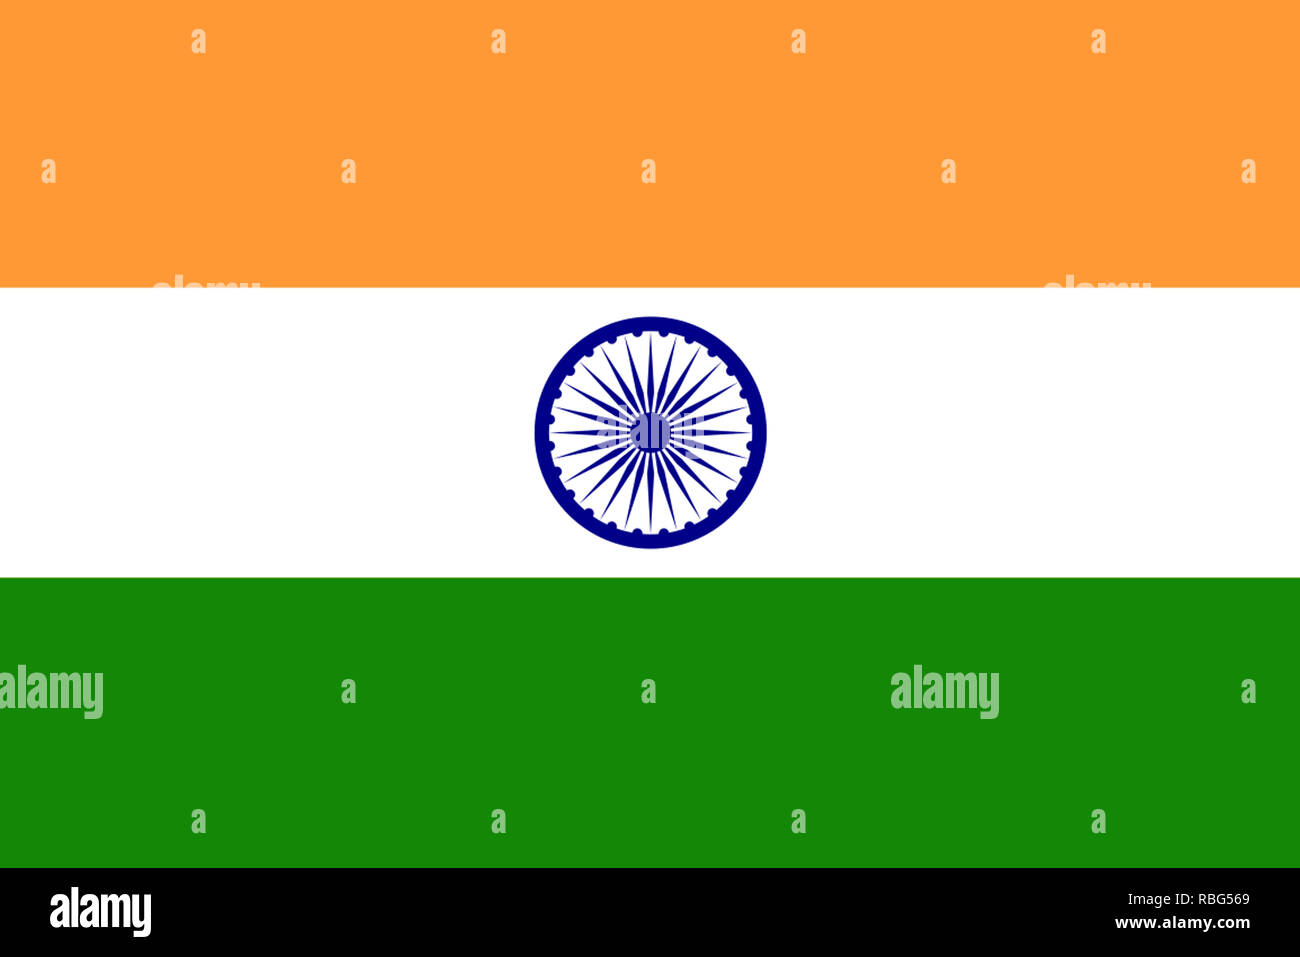 Indian flag on the continent of Asia Stock Photo